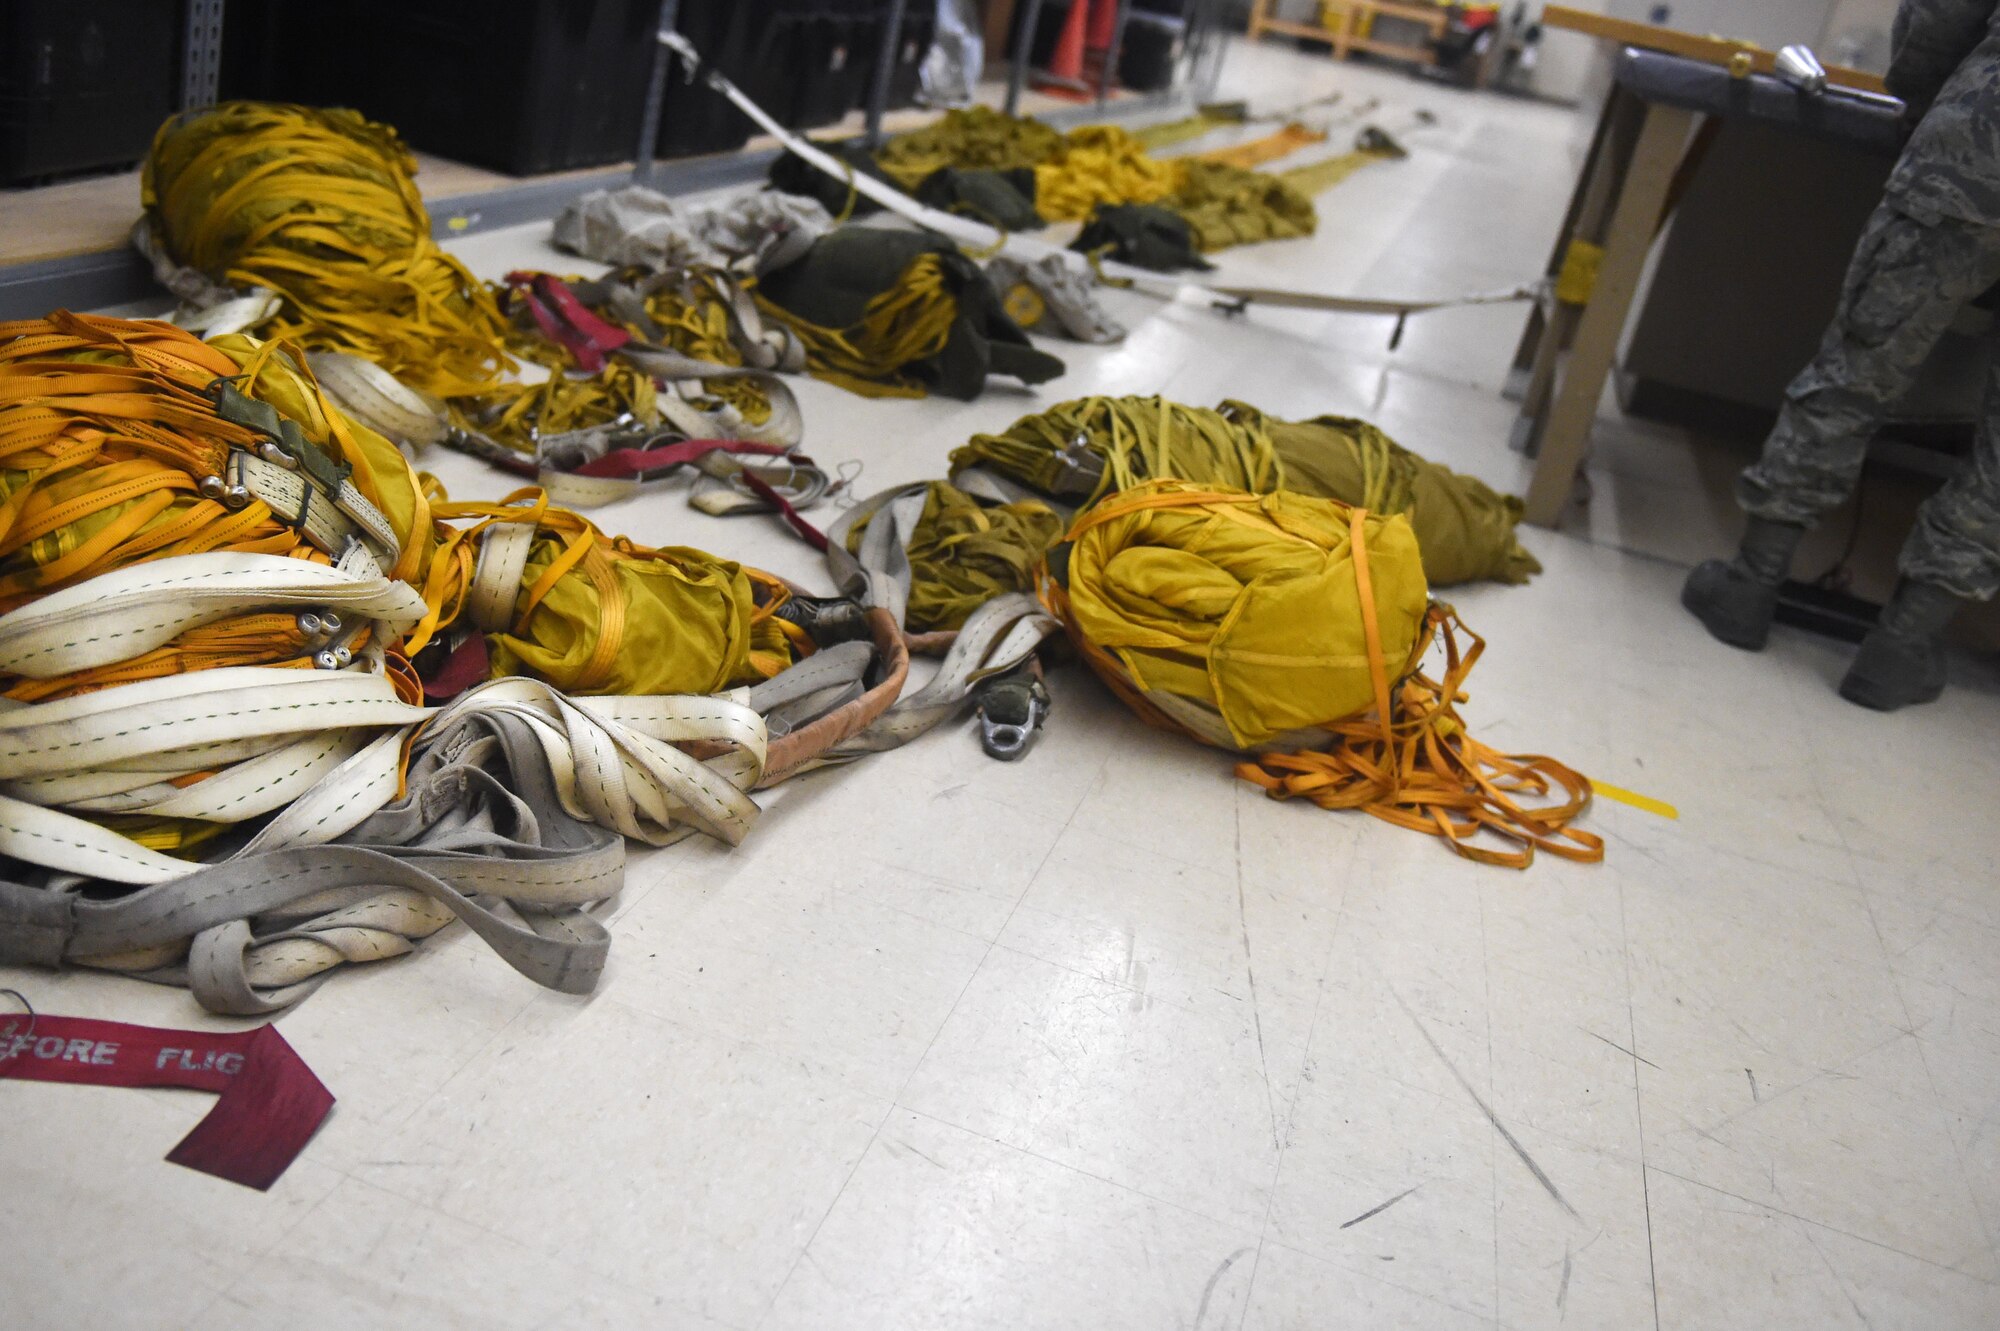 Several parachutes lie on the floor of the Aircrew Flight Equipment shop at Holloman Air Force Base, N.M., July 21. AFE personnel manage the inspection, maintenance and adjustments to the equipment assigned to the pilots they support. (Last names are being withheld due to operational requirements. U.S. Air Force photo by Staff Sgt. Eboni Prince)